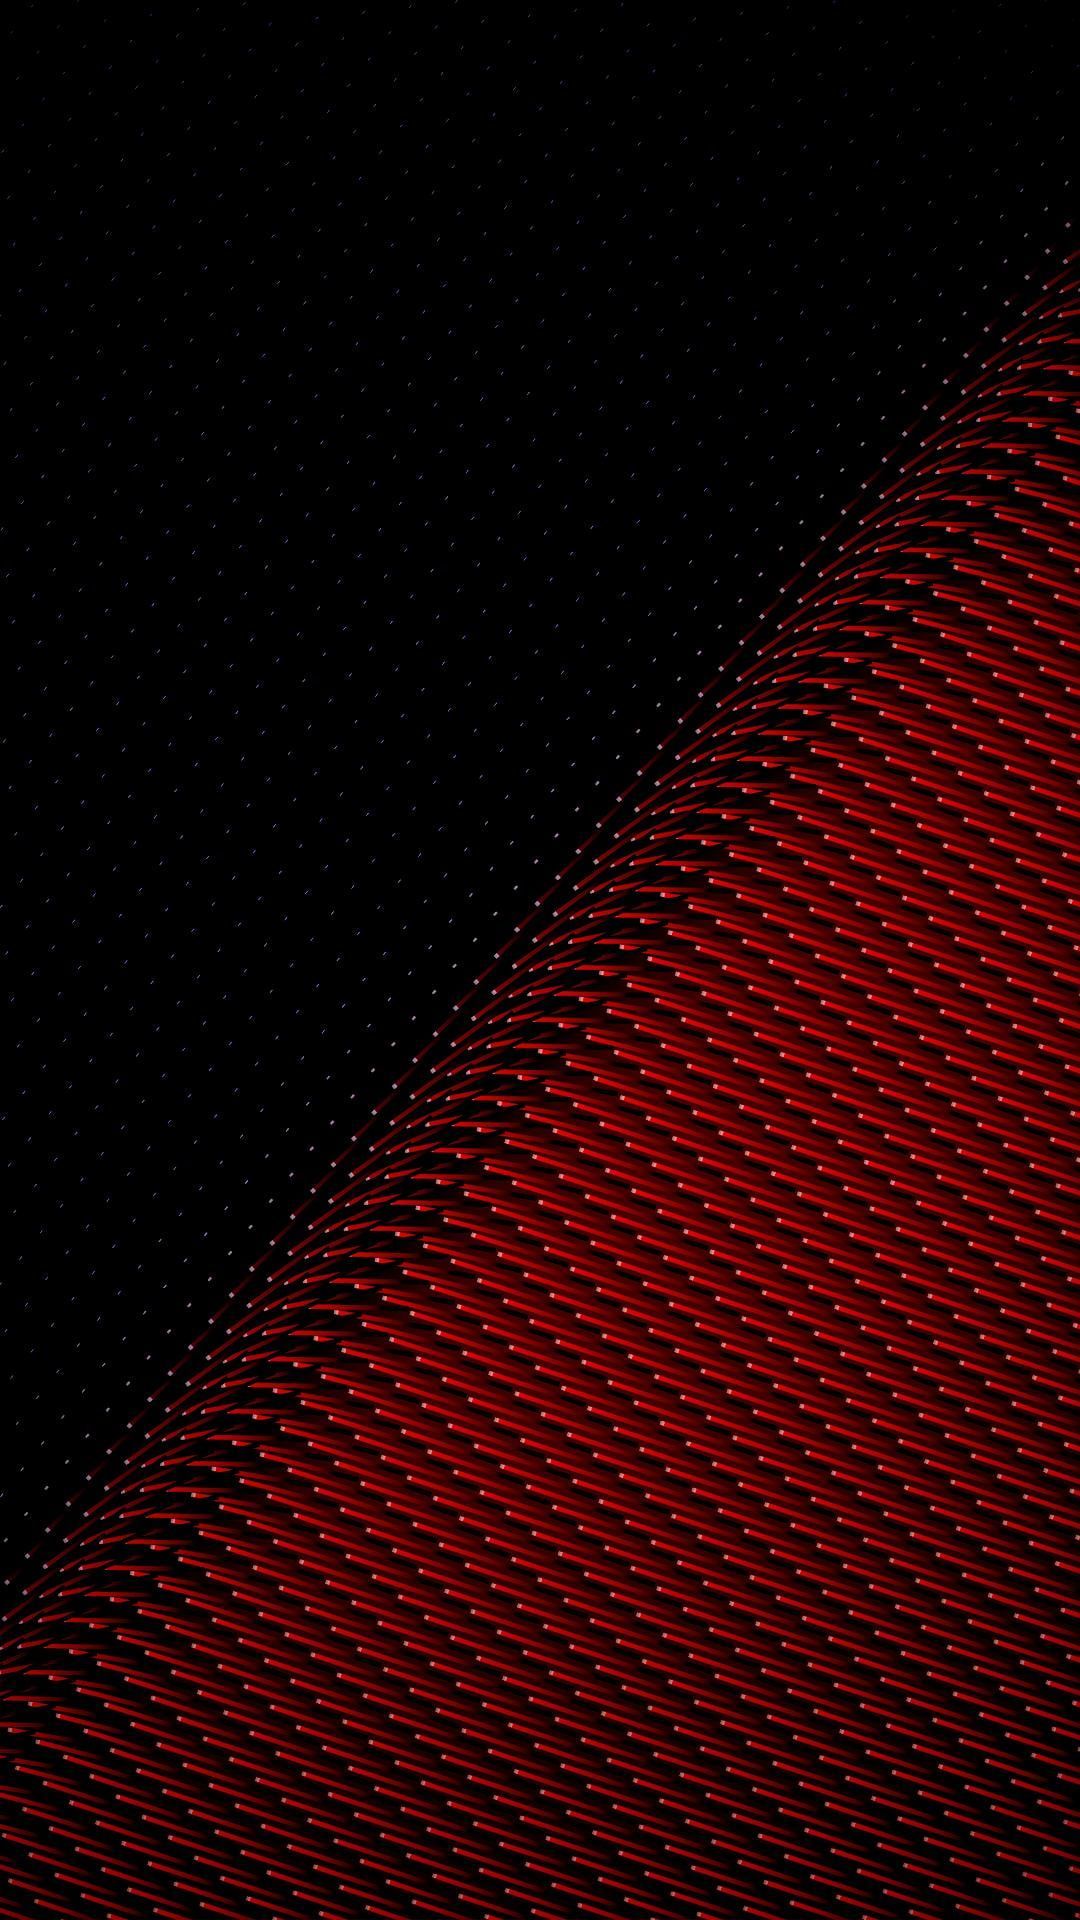 Amoled Wallpaper 4k Android Amoled 4k Wallpapers Wallpapers Free By